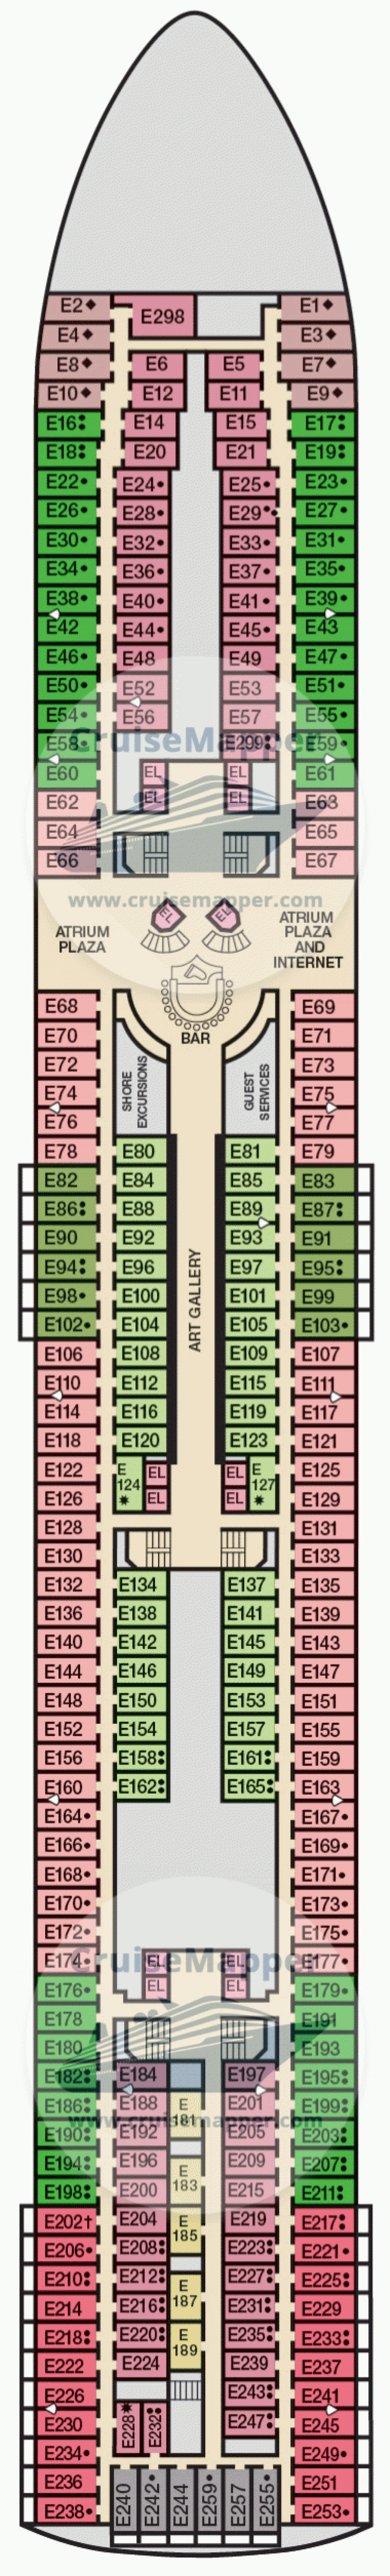 Picture of: Carnival Elation deck  plan  CruiseMapper